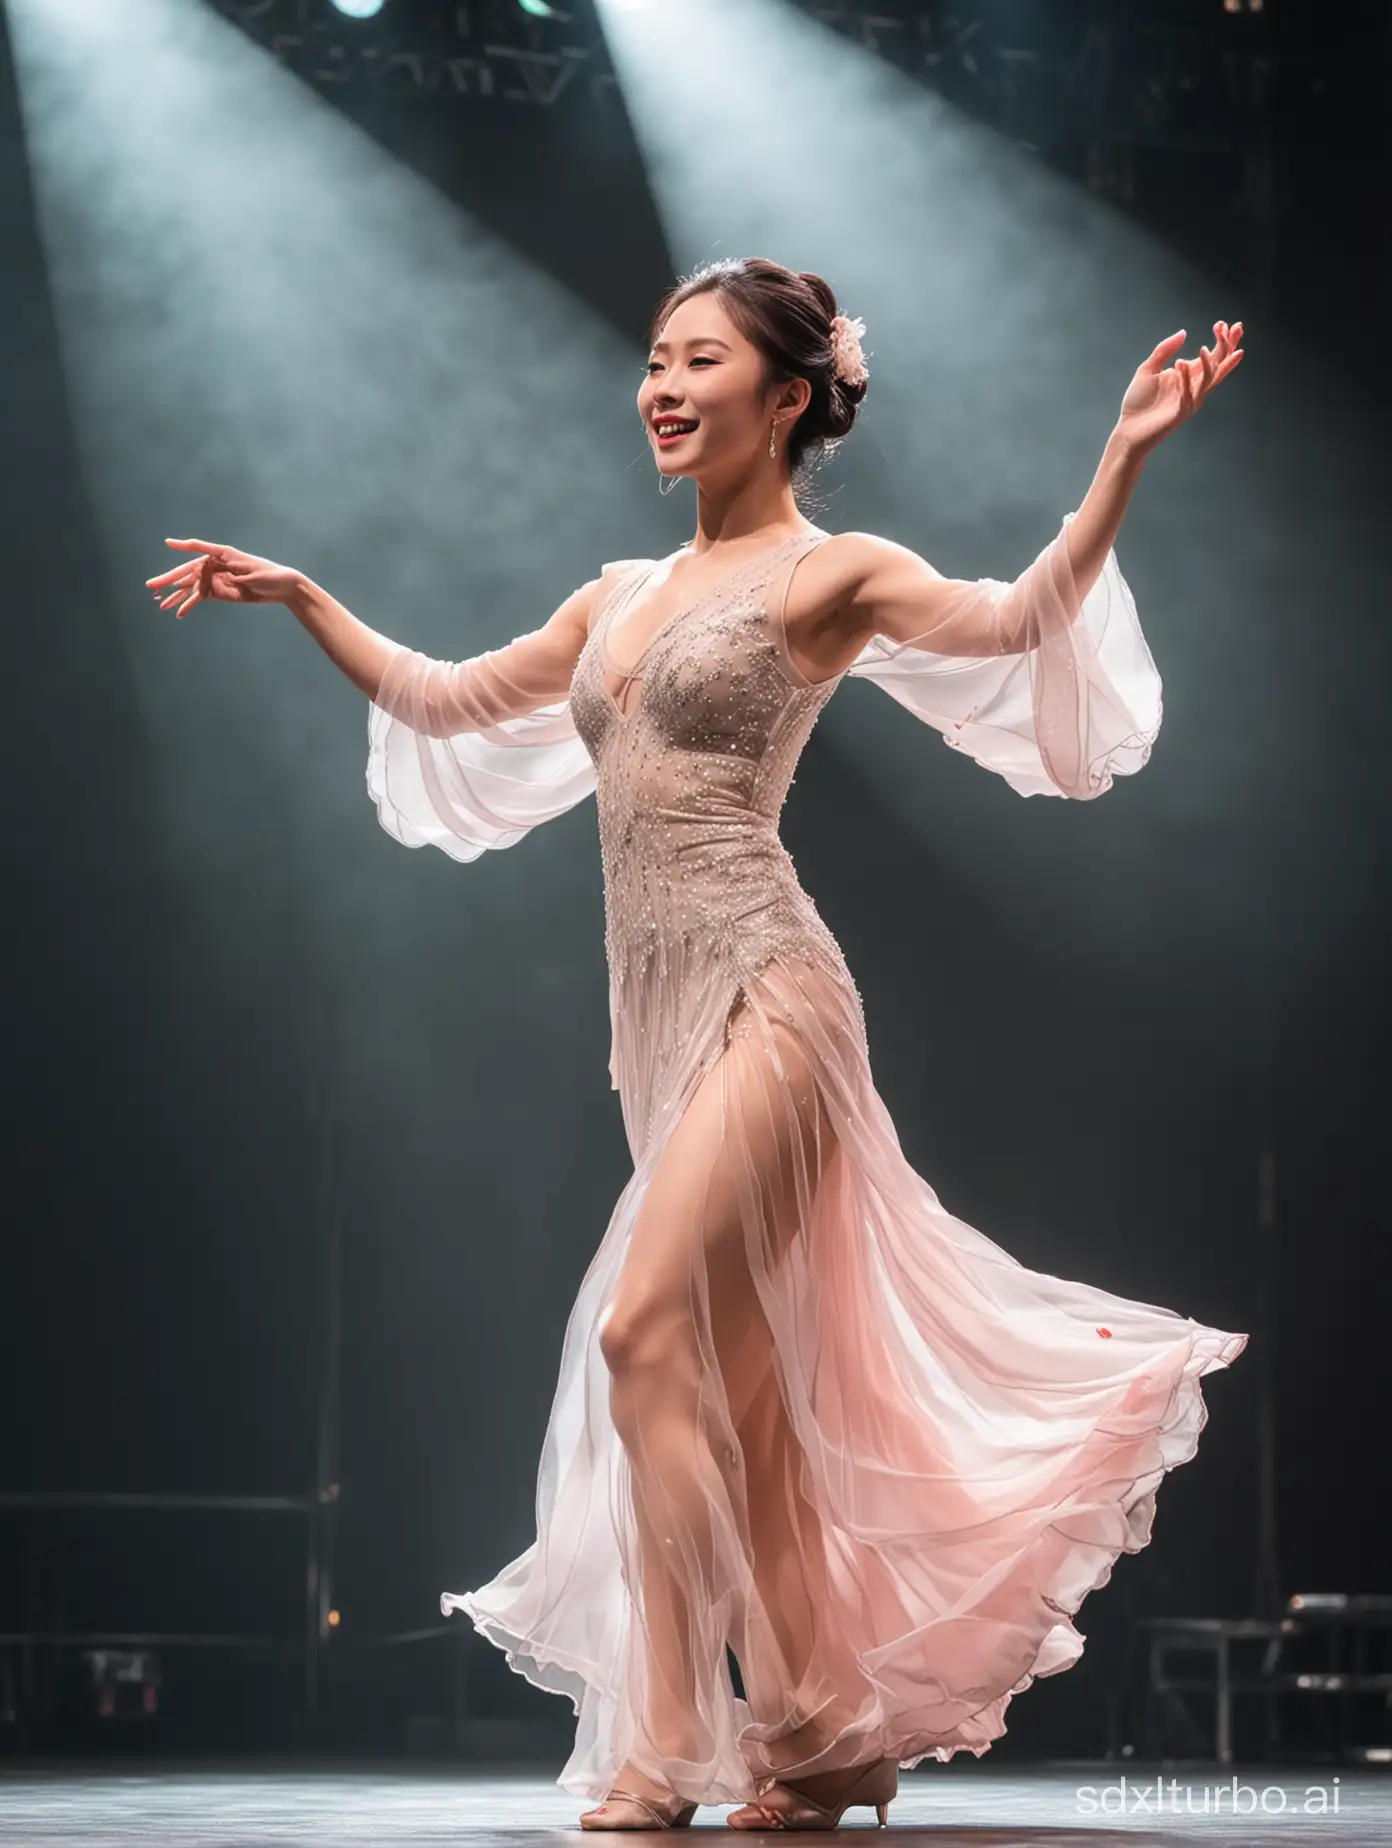 Elegant-Chinese-Woman-Dancing-Gracefully-on-Stage